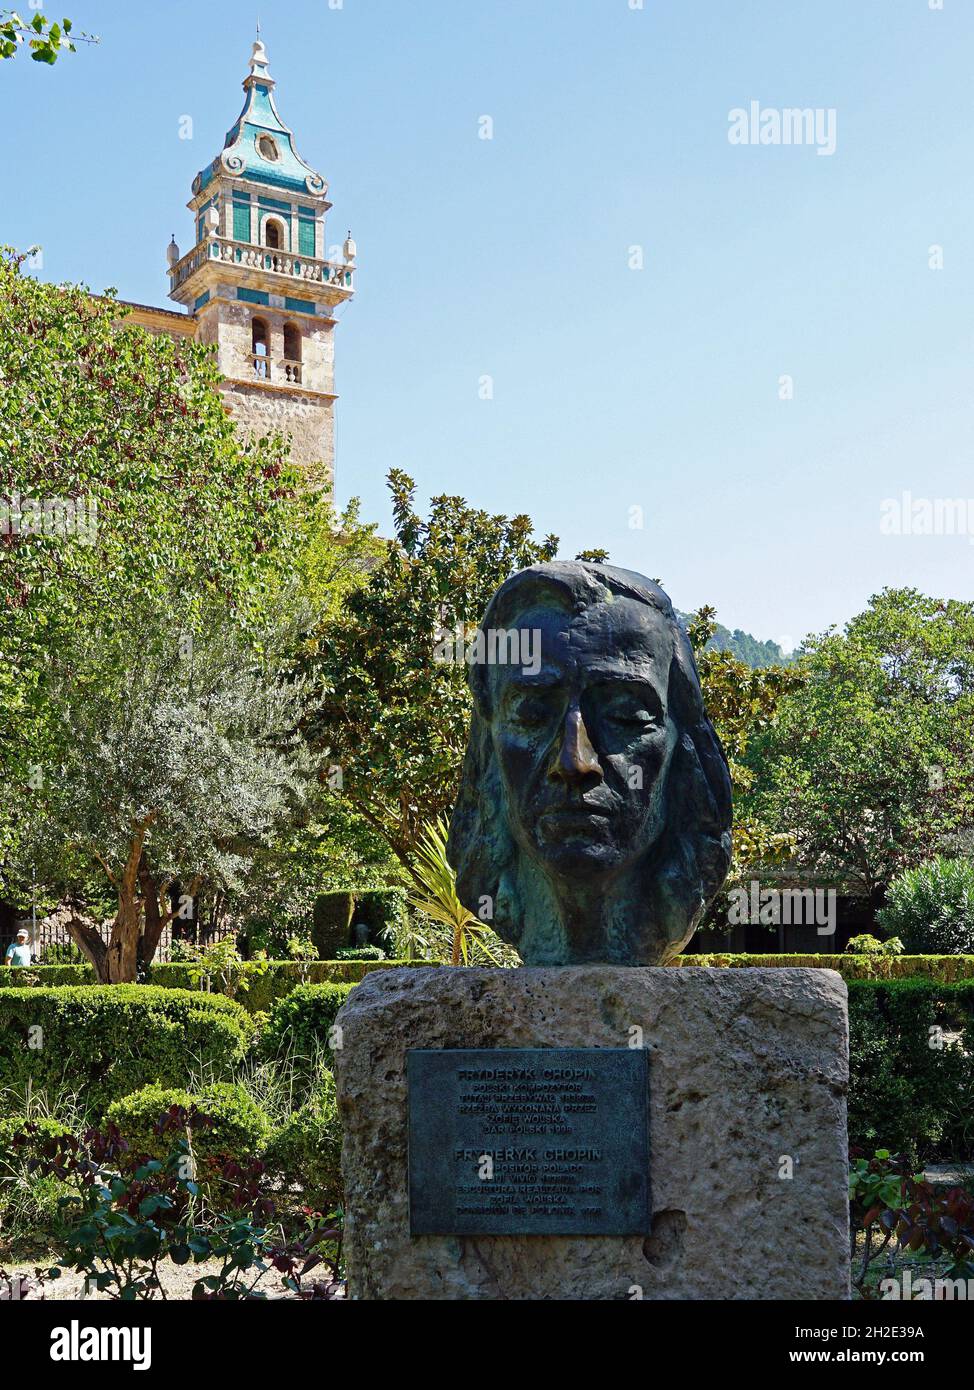 Bust of Polish composer Frederic Chopin and Carthusian Monastery in the background. Valldemossa, Majorca, Spain 30.09.2019 Stock Photo